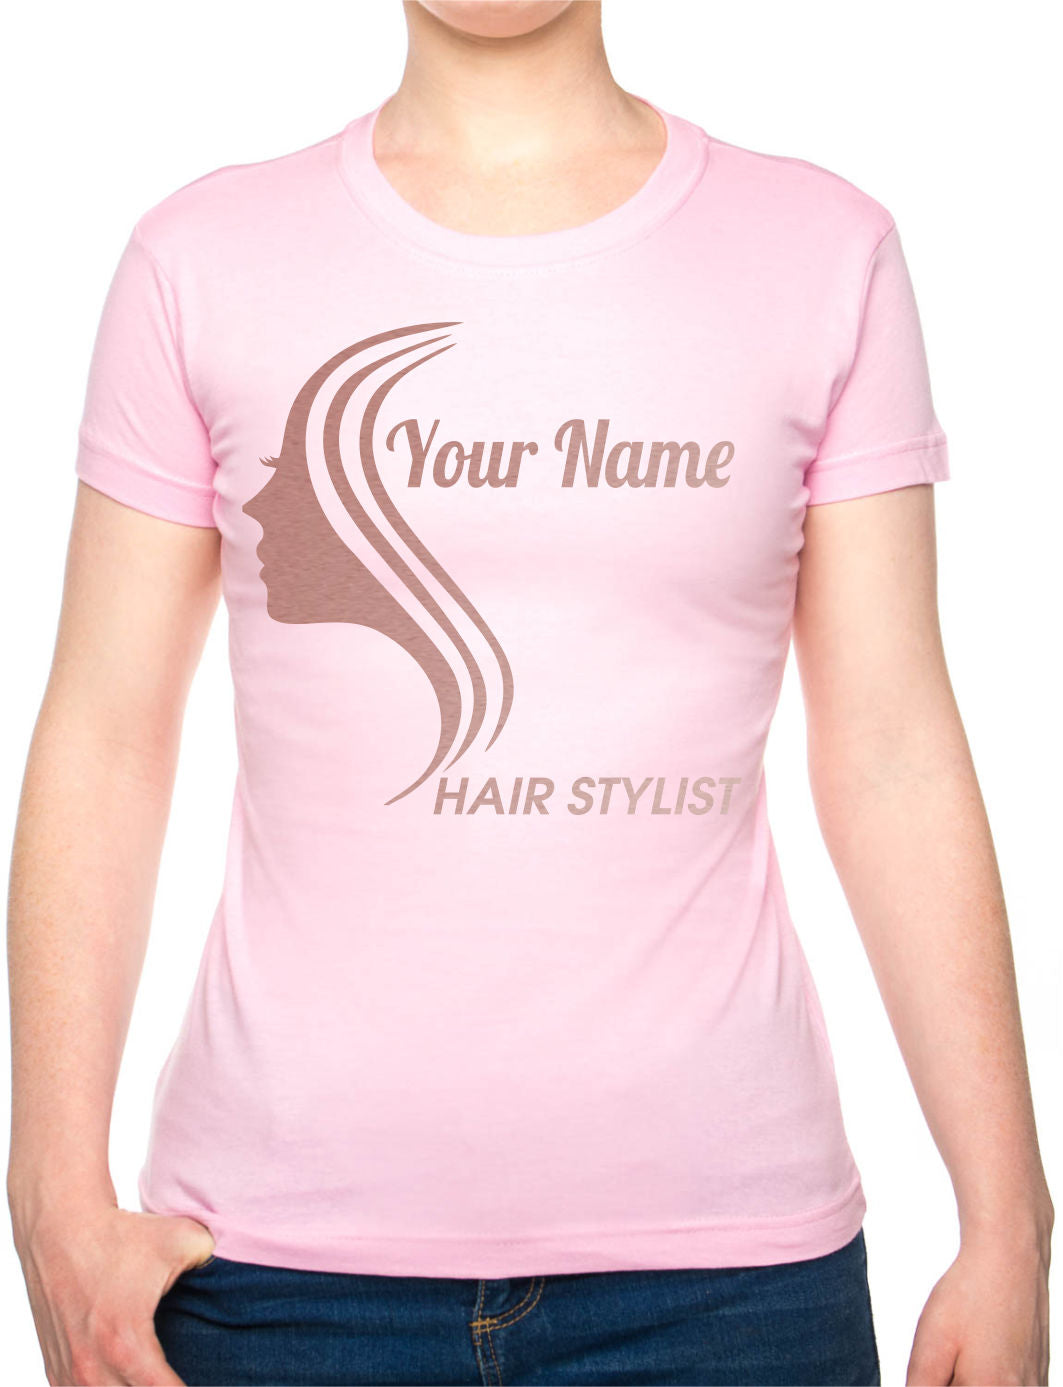 Personalised Ladies T-Shirt Hair Stylist Any Name Work Tee For Hairdresser